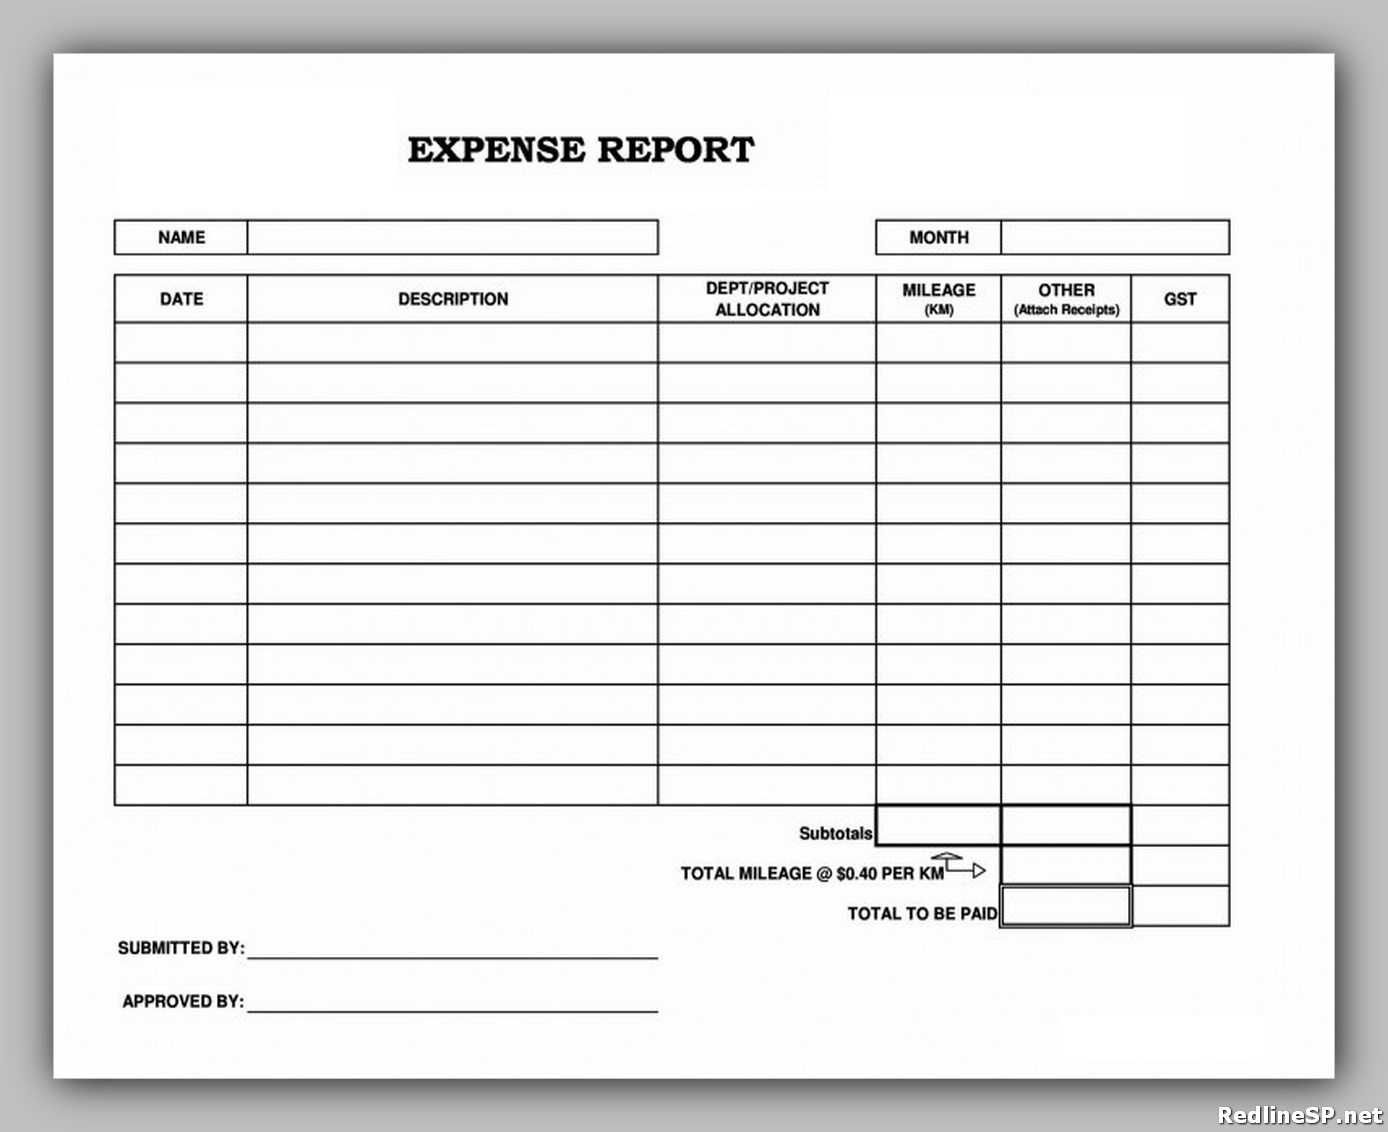 saving uber receipts as pdf for expense report